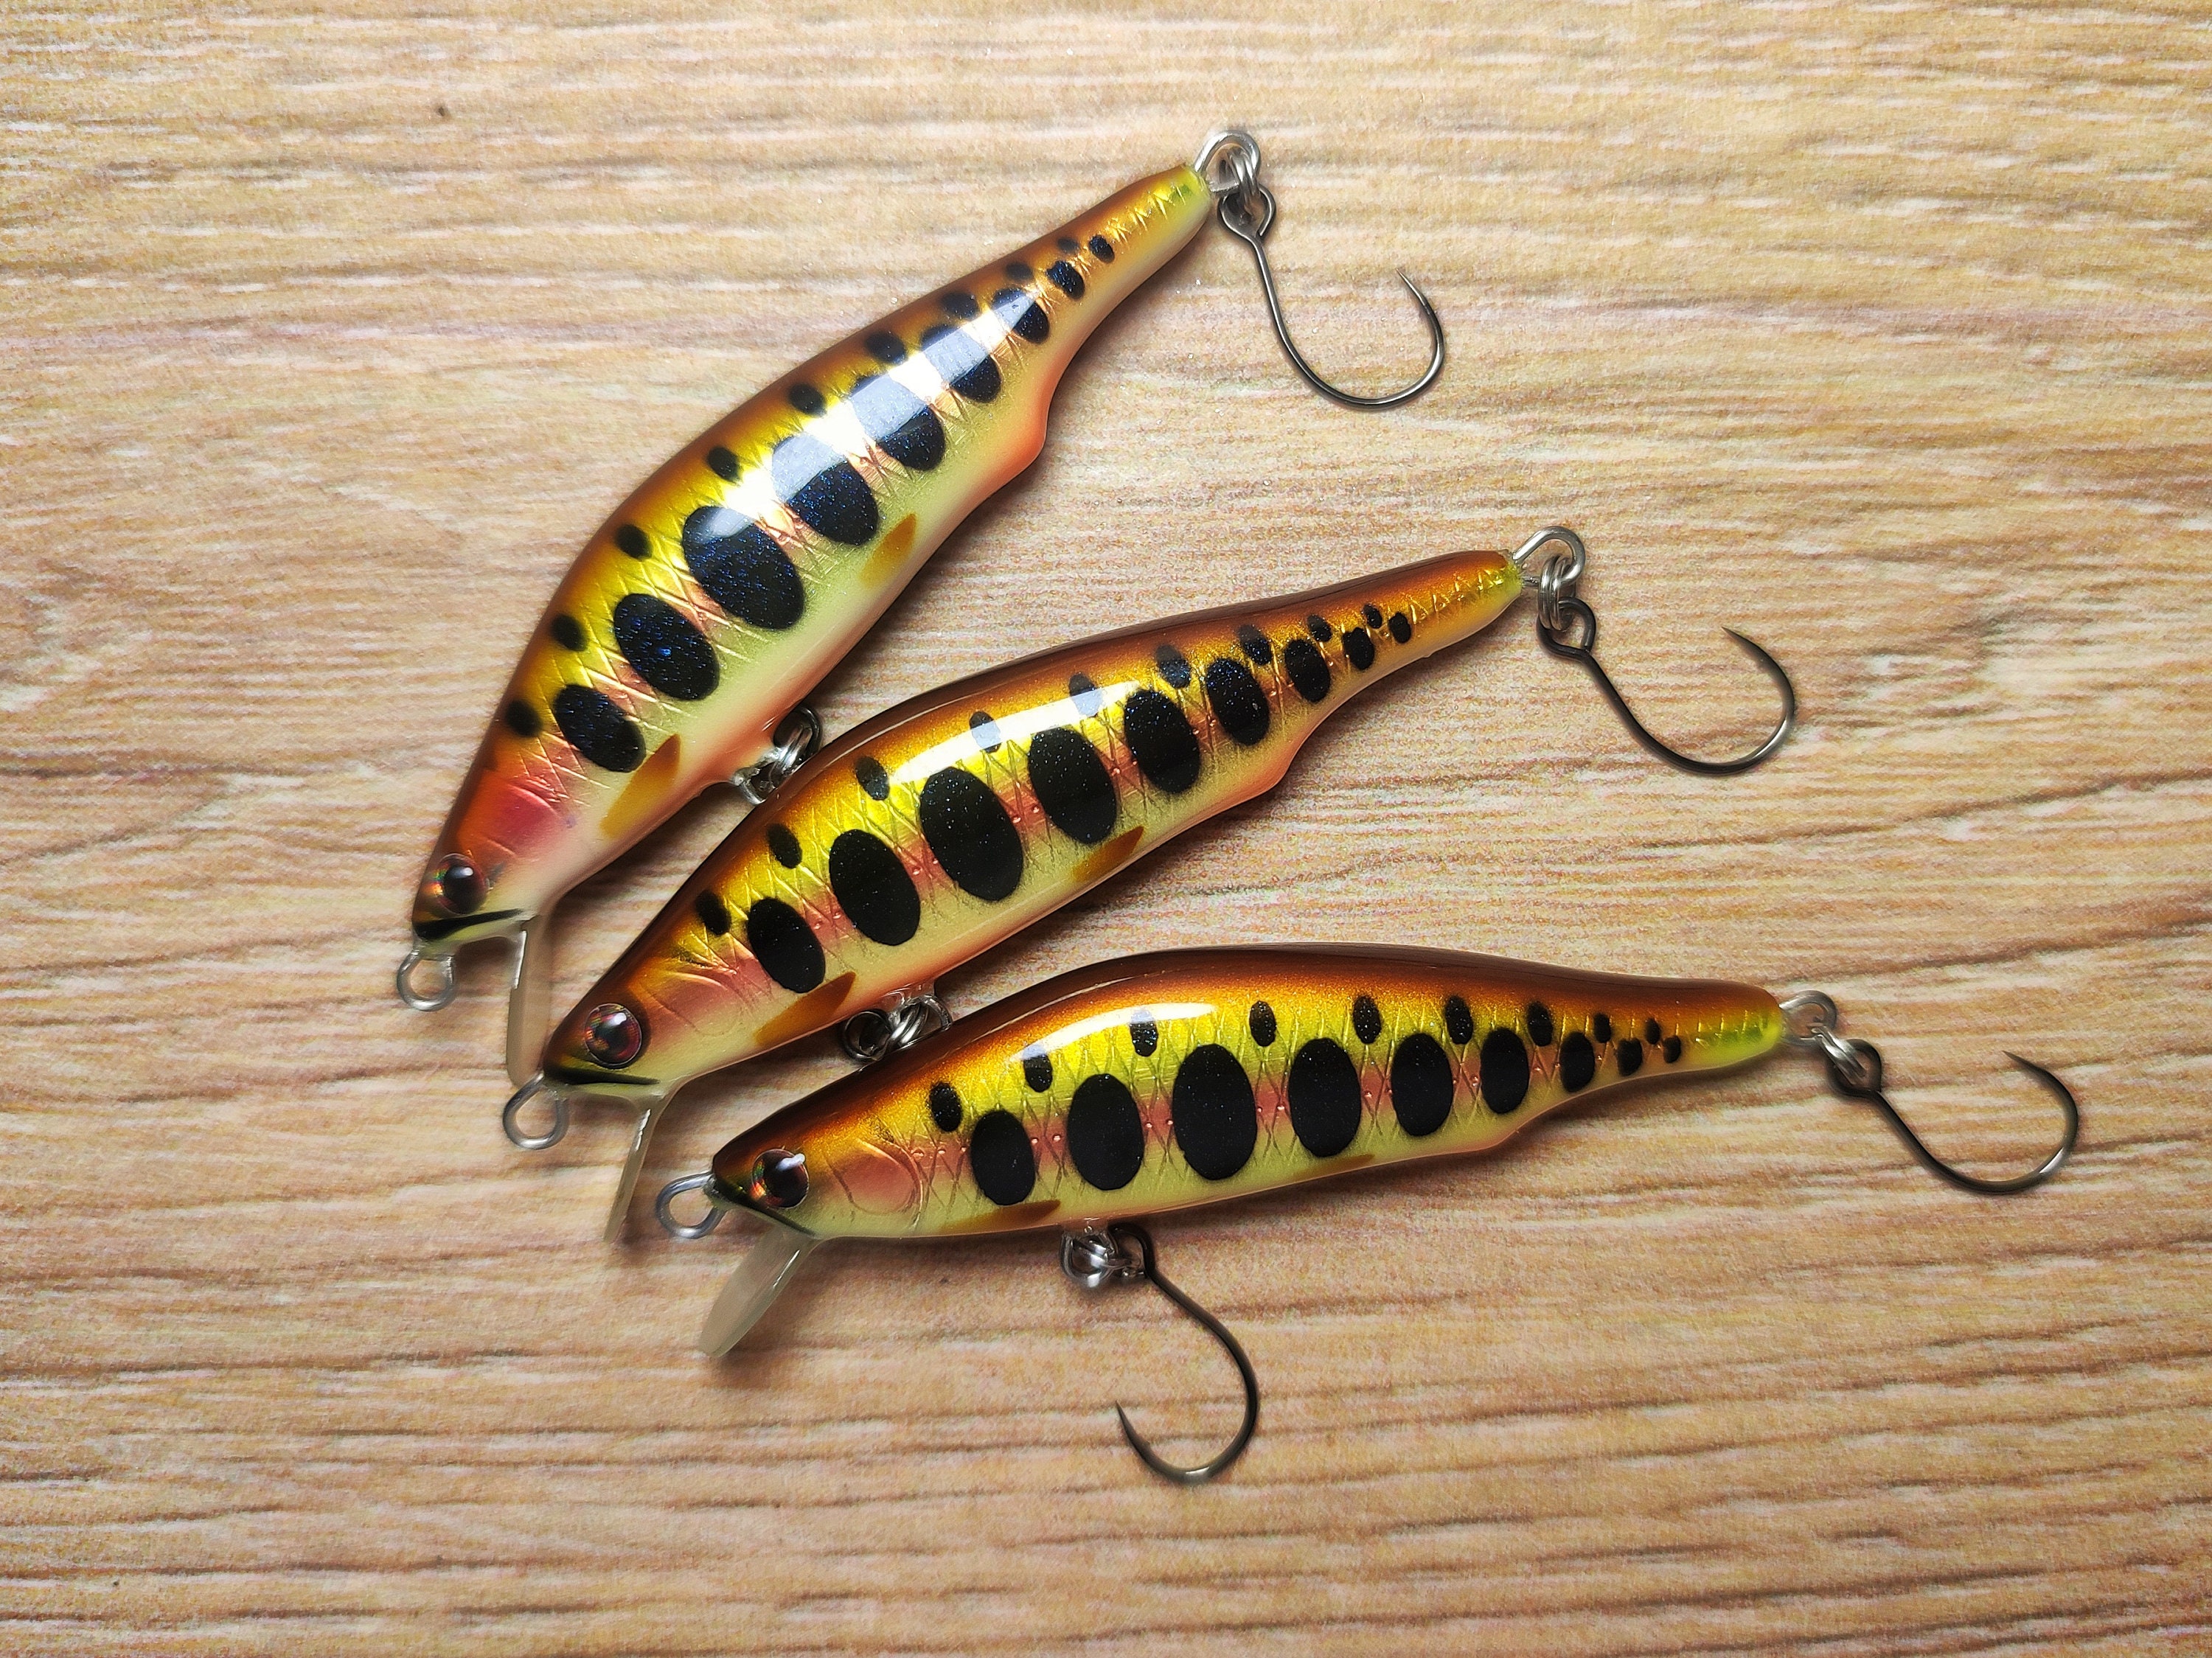 Veles Handcrafted Lure 40mm-2,8gr Sinking. Trout Fishing Lure. Twitching  Action Bait. Made From Balsa Wood. Single Inline Hooks. 